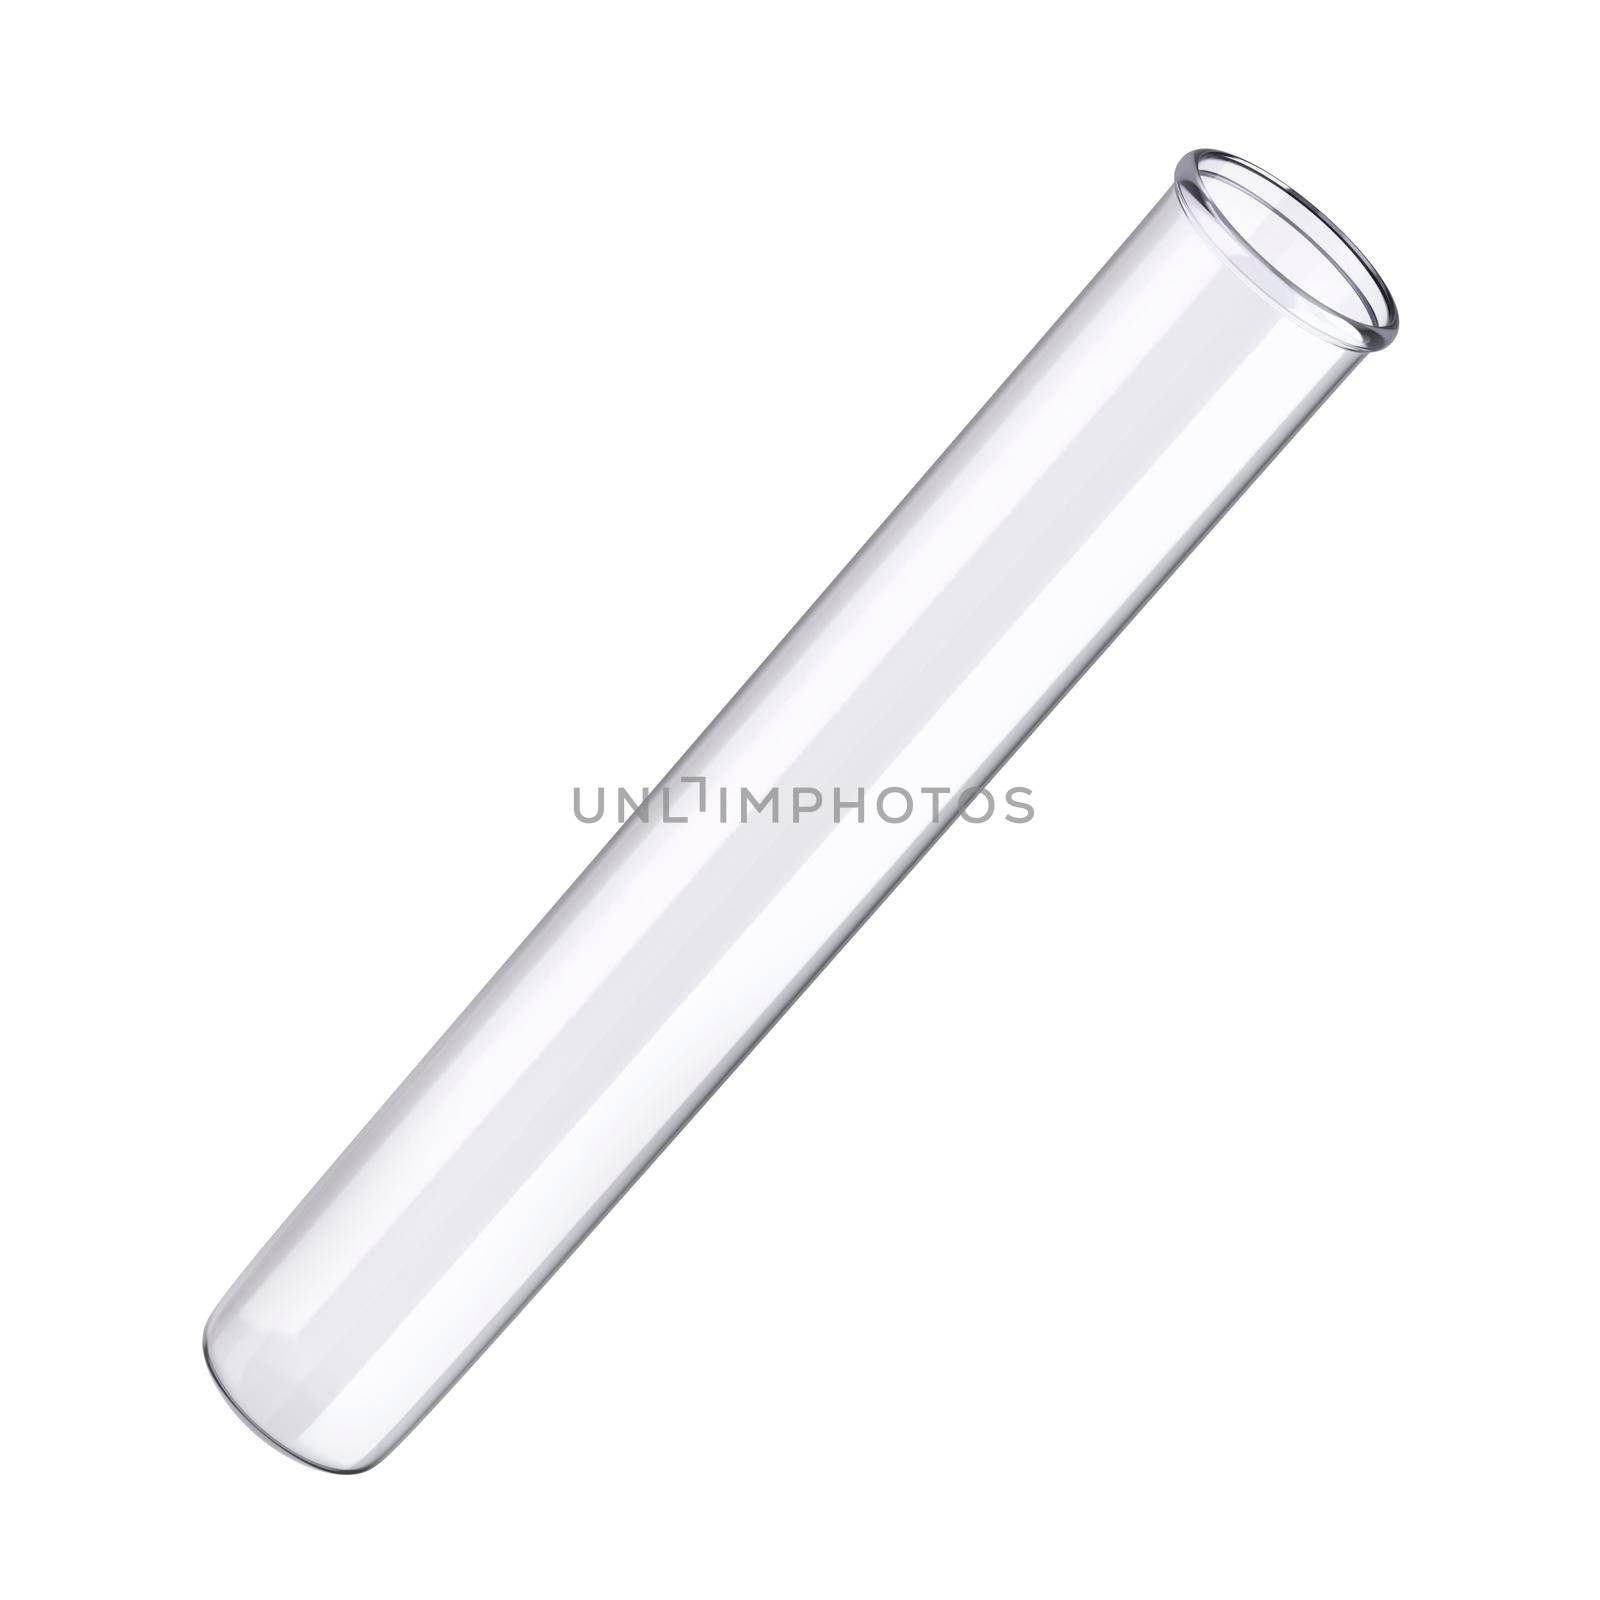 Empty test tube by magraphics